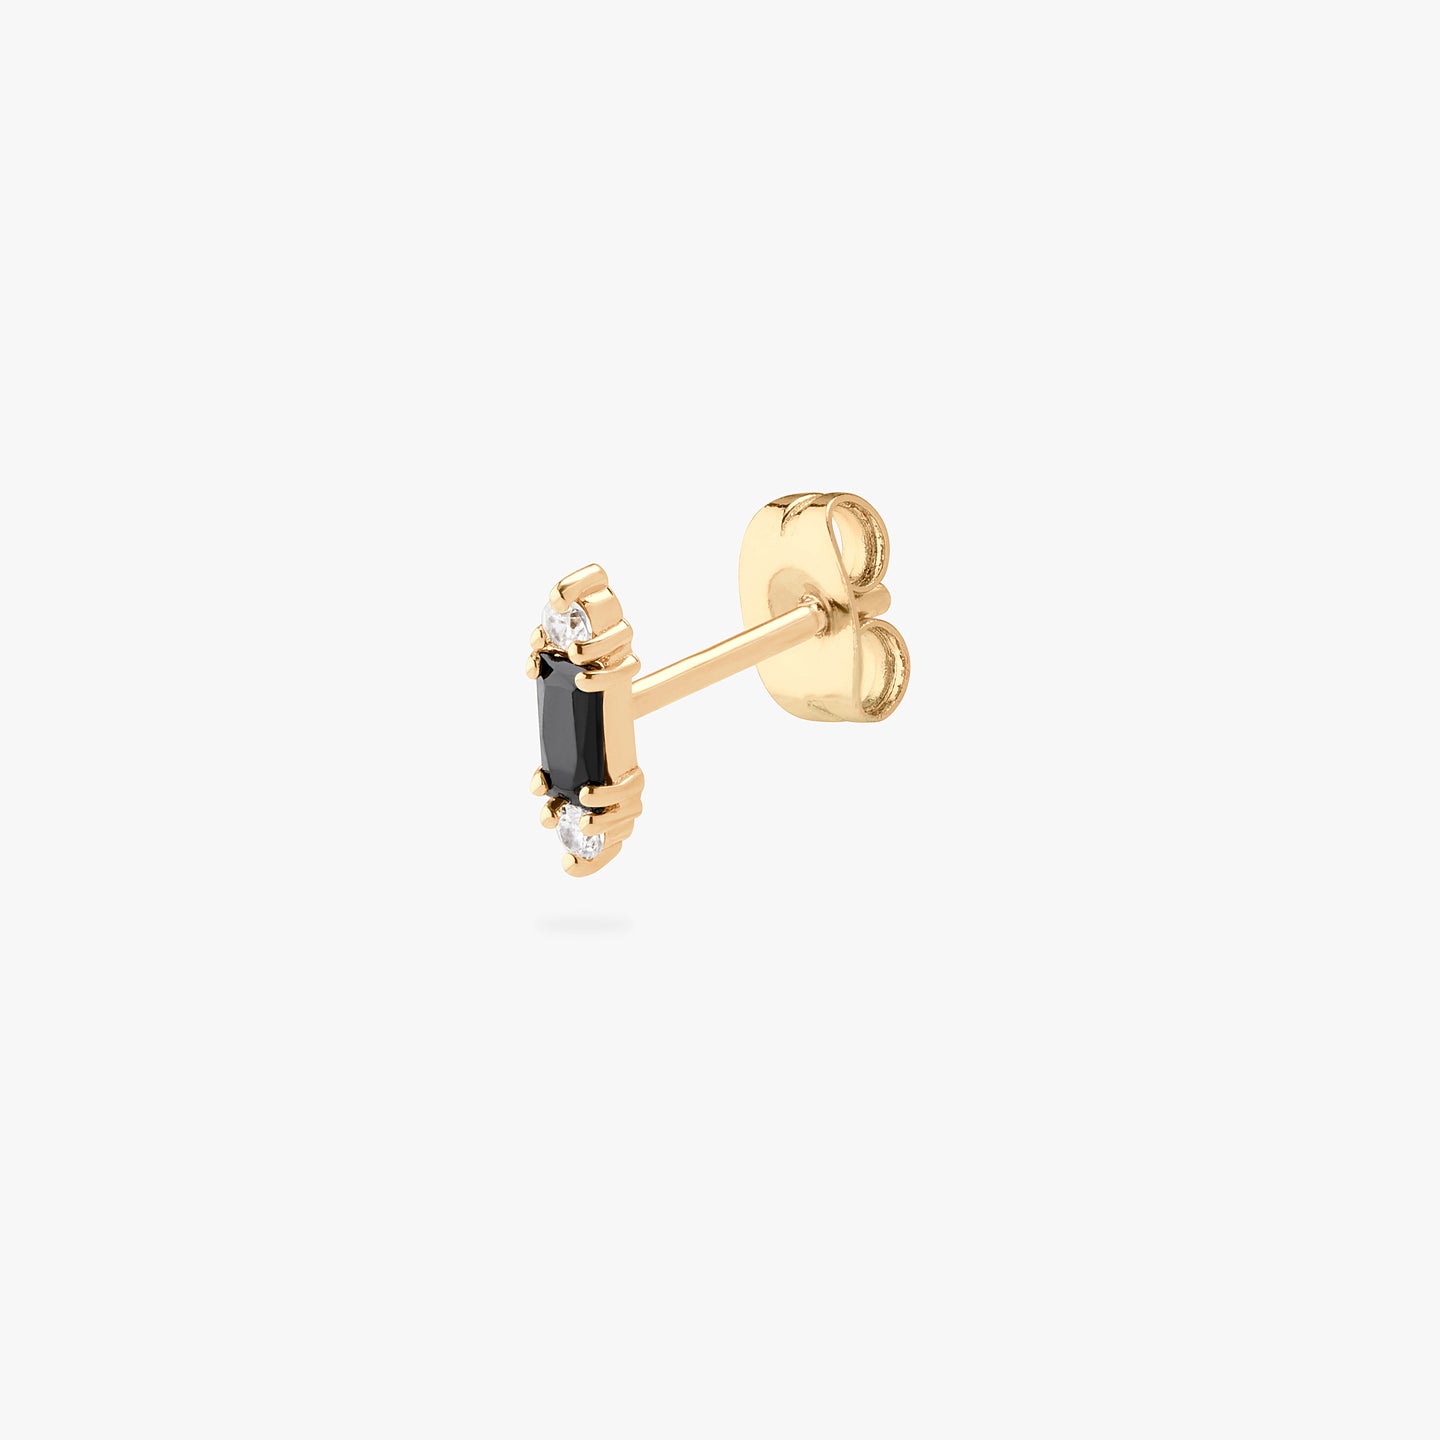 A black baguette-shaped CZ stud with two gold/clear CZs on the end of the baguette. color:null|gold/black